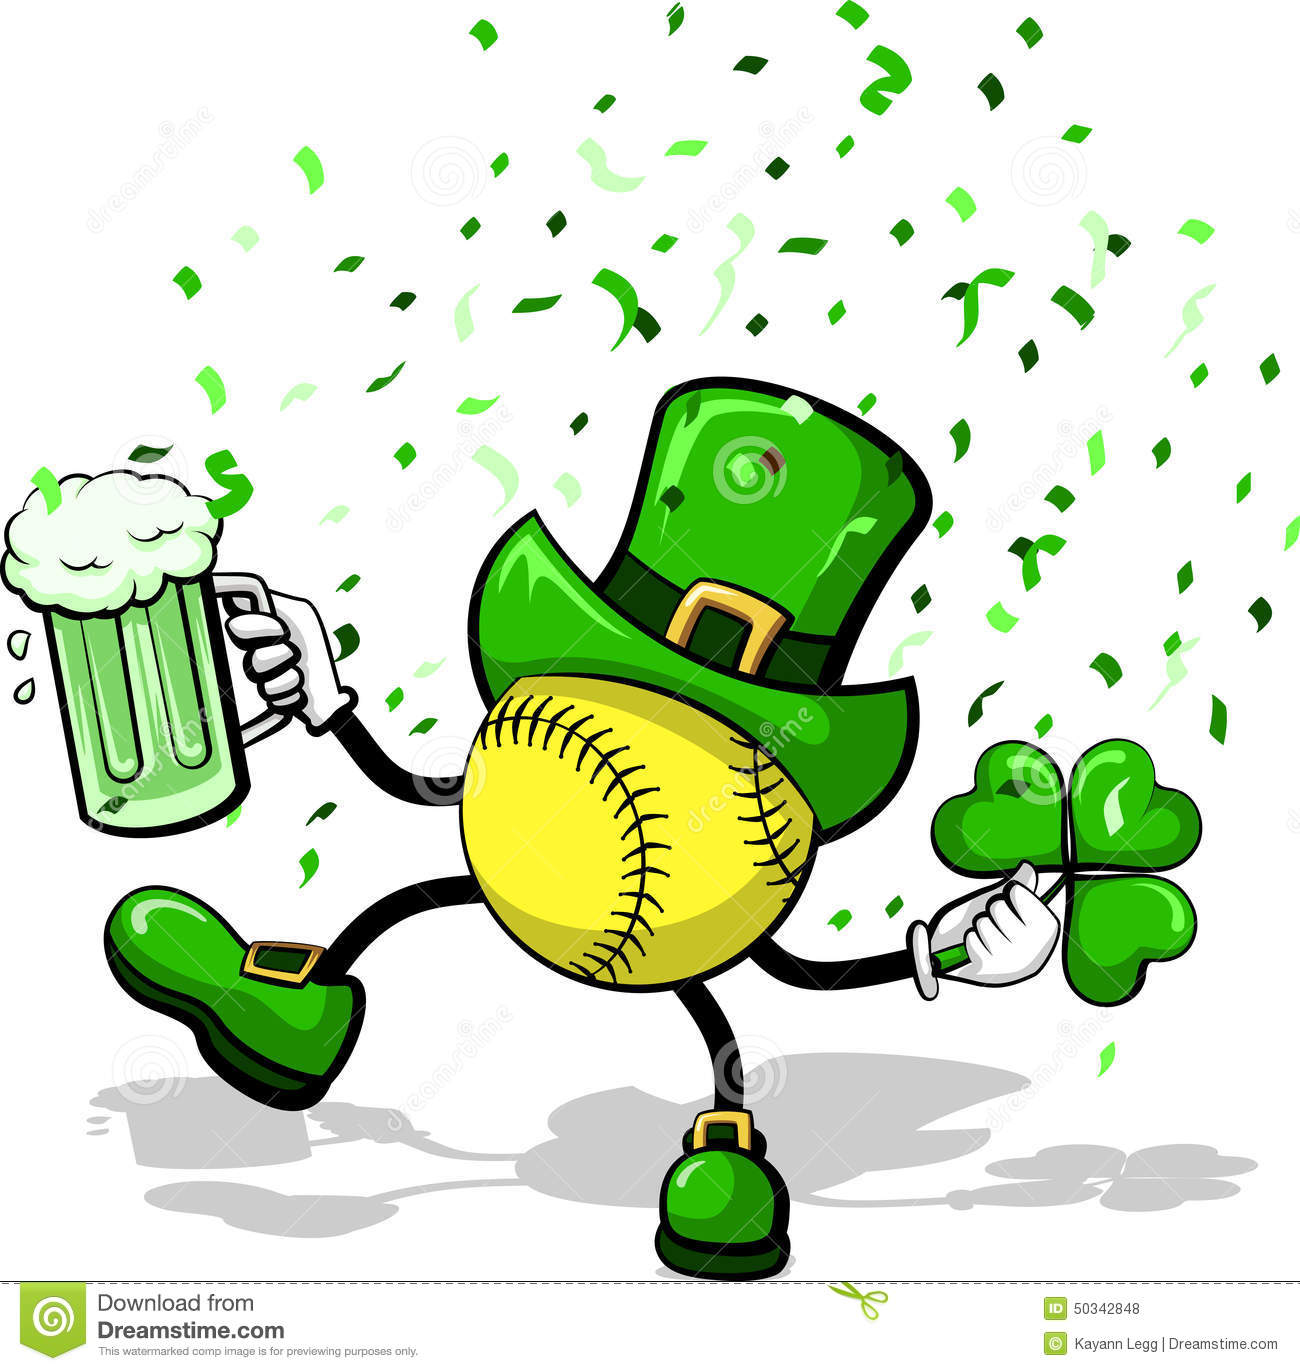 Softball Leprechaun Celebrating St  Patrick S Day By Dancing With A